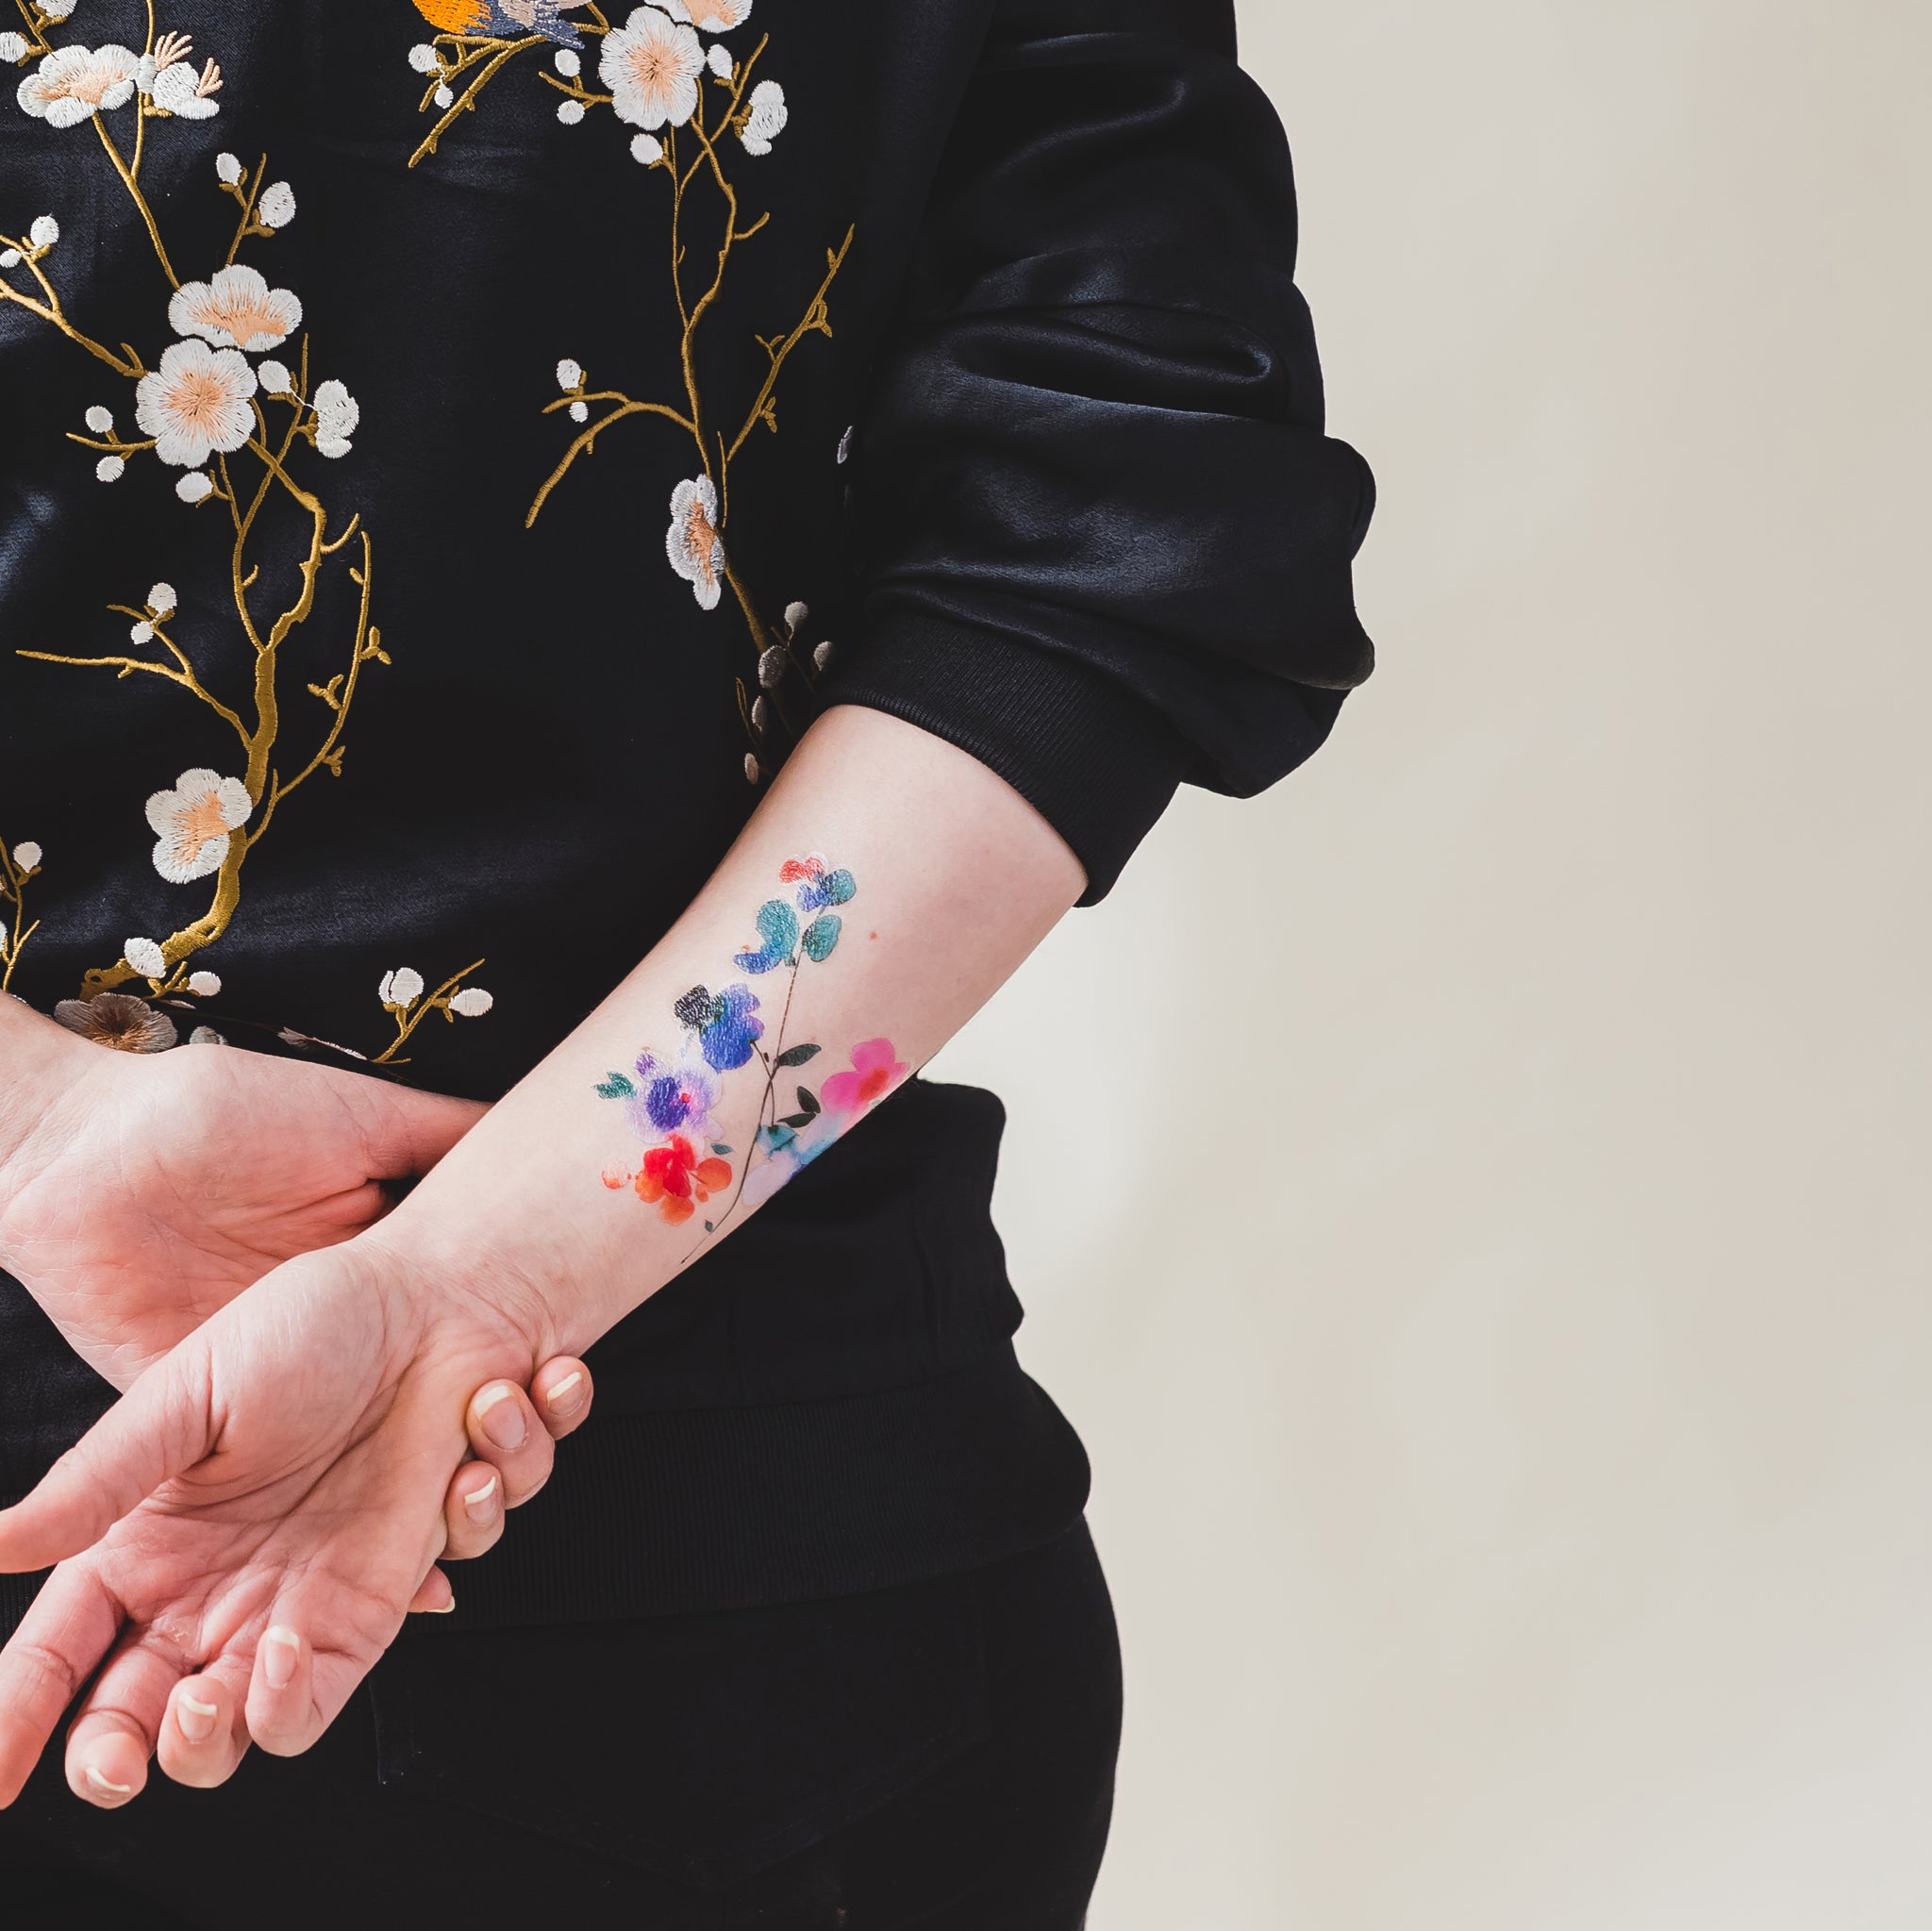 30+ Orchid Tattoos: Top Designs & Meanings